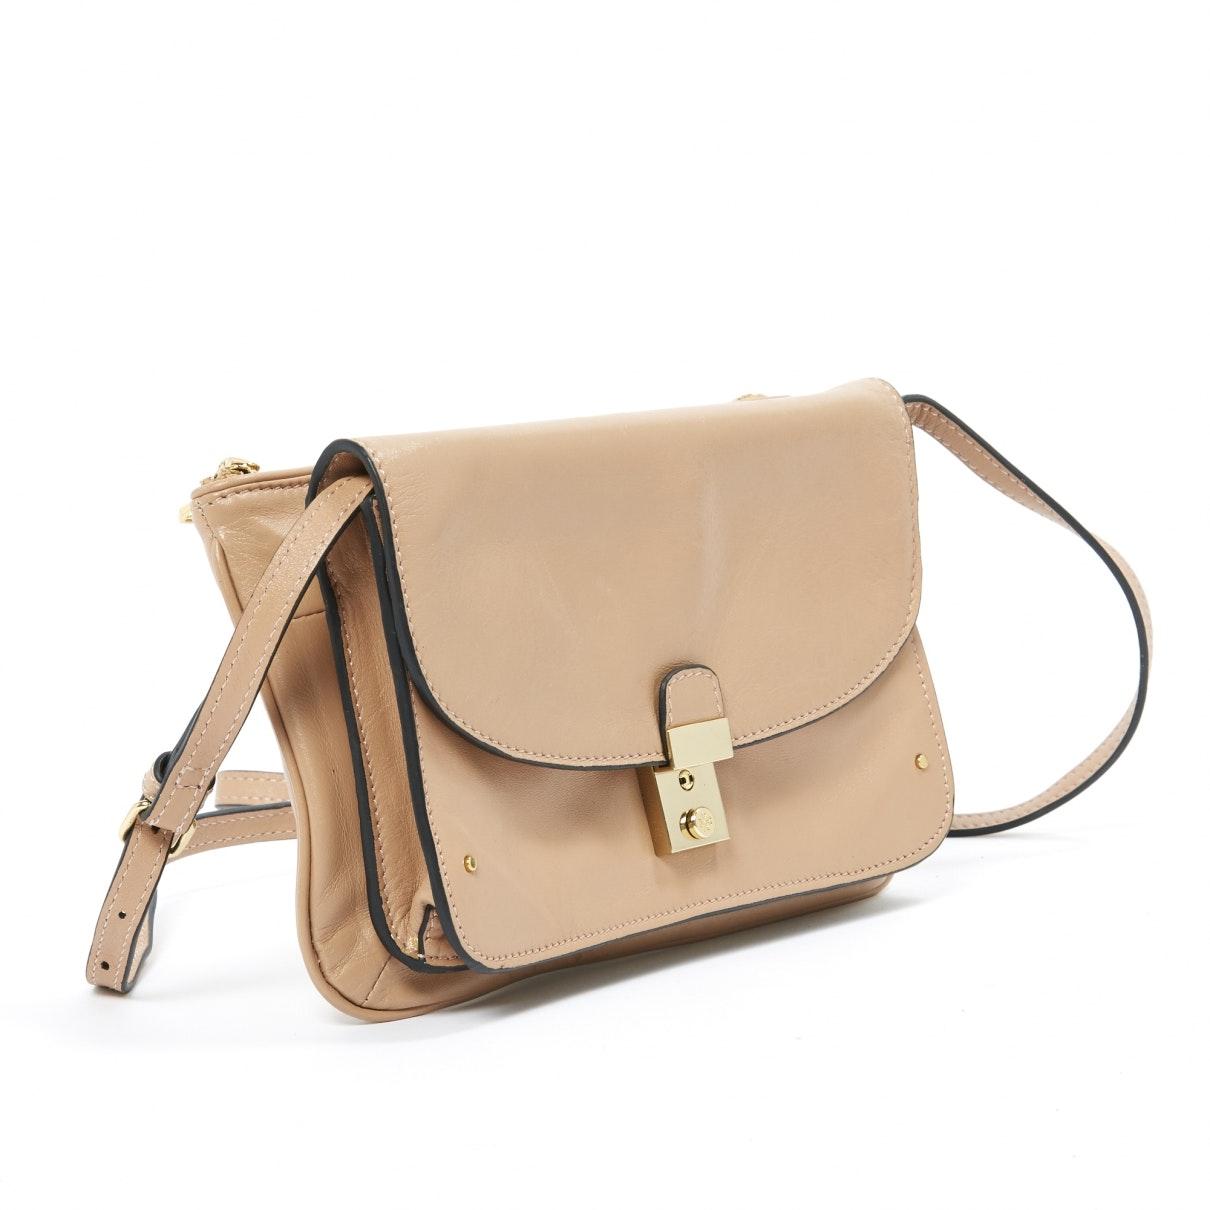 Tory Burch Beige Leather Handbag in Natural - Lyst